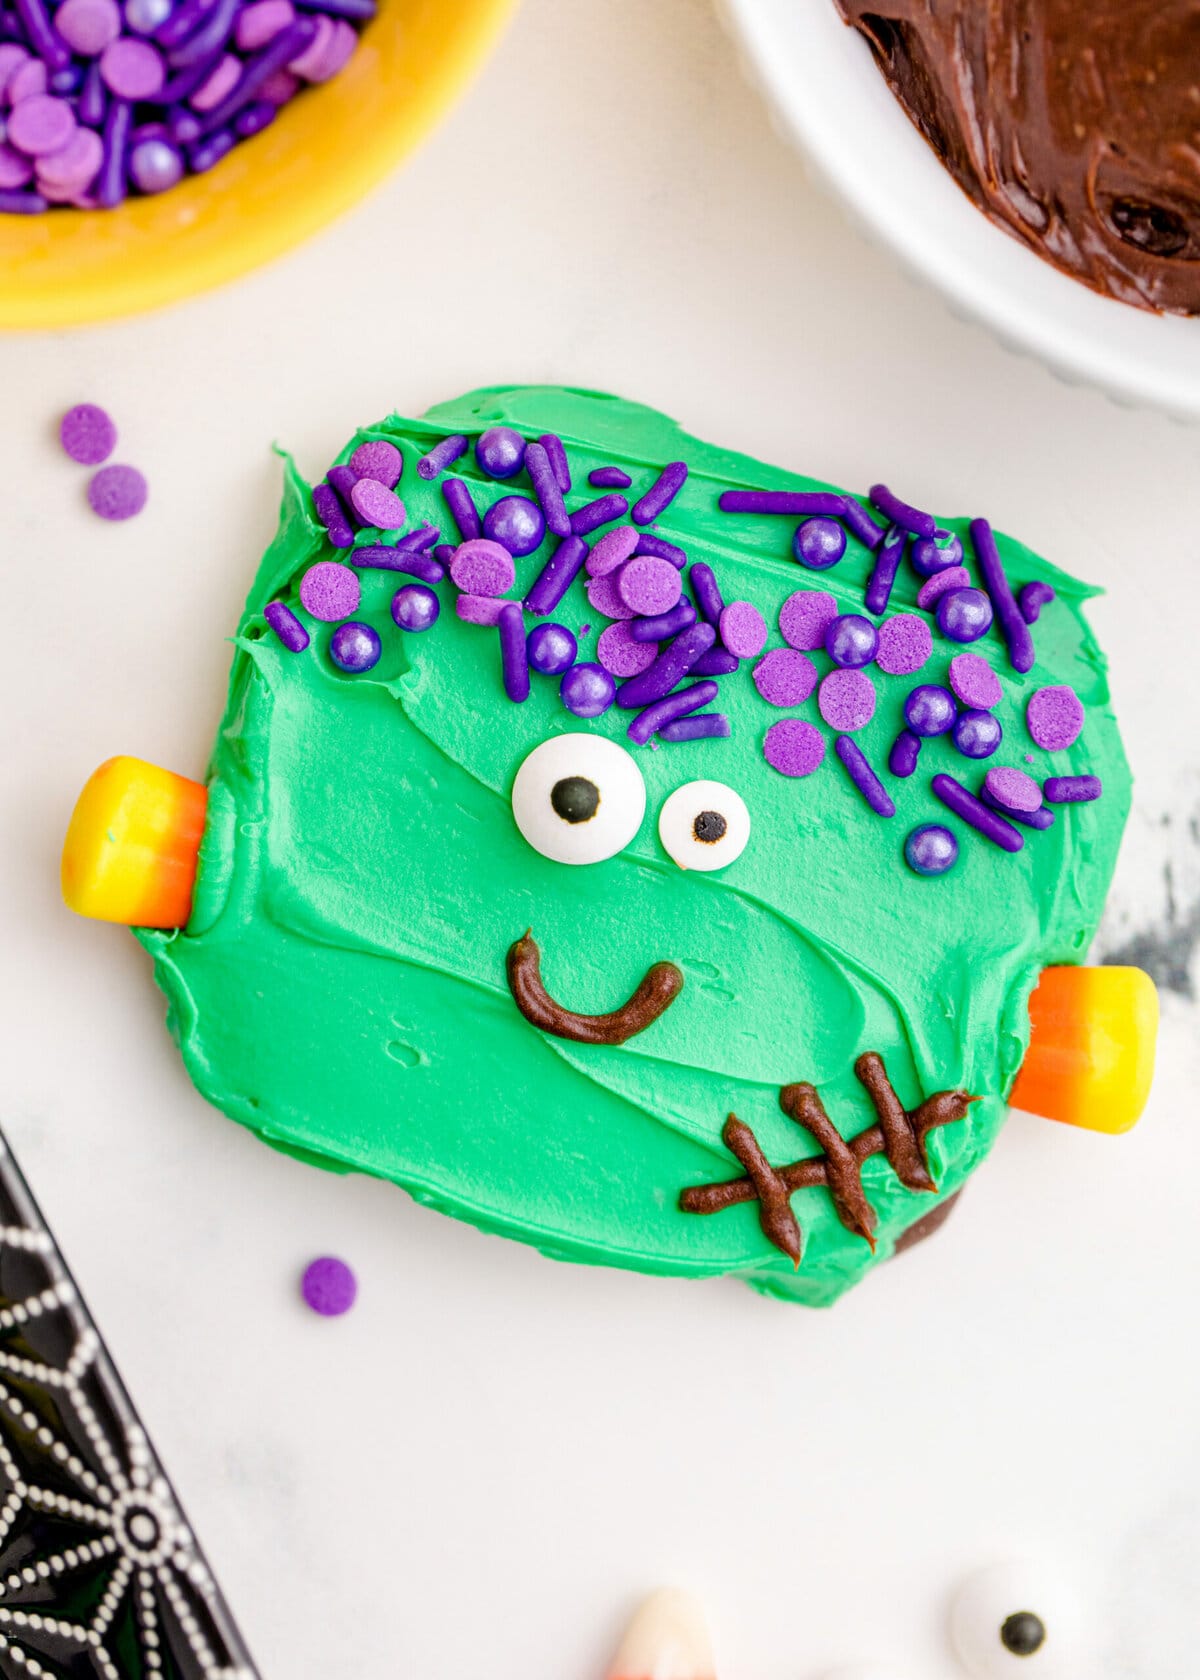 A green and purple monster cookie decorated with frosting and sprinkles.